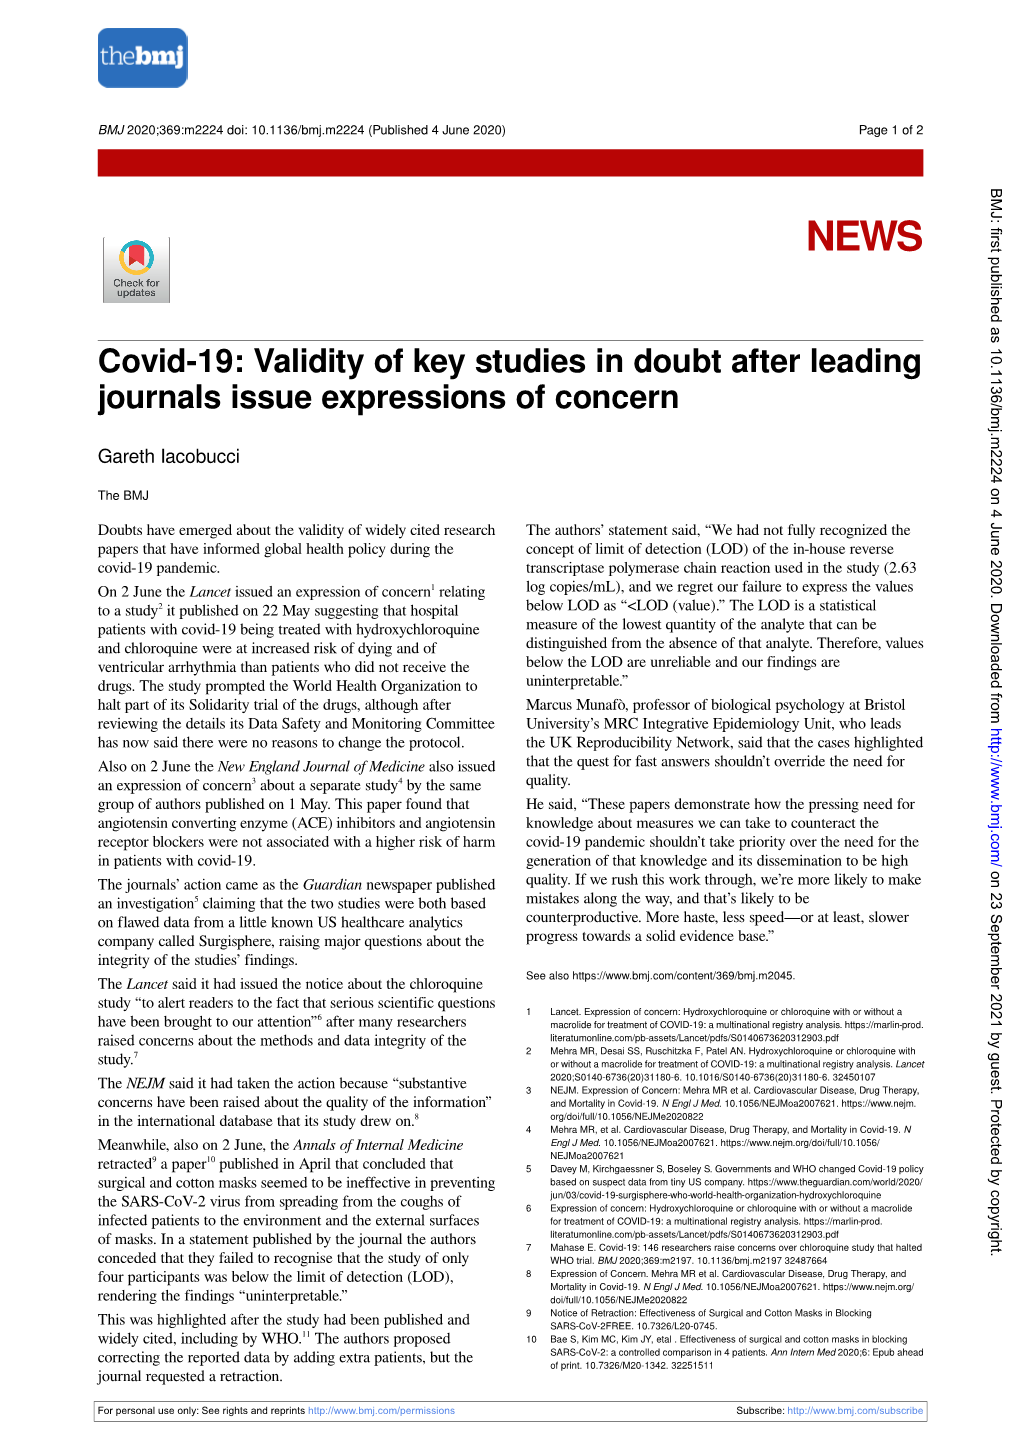 Covid-19: Validity of Key Studies in Doubt After Leading Journals Issue Expressions of Concern